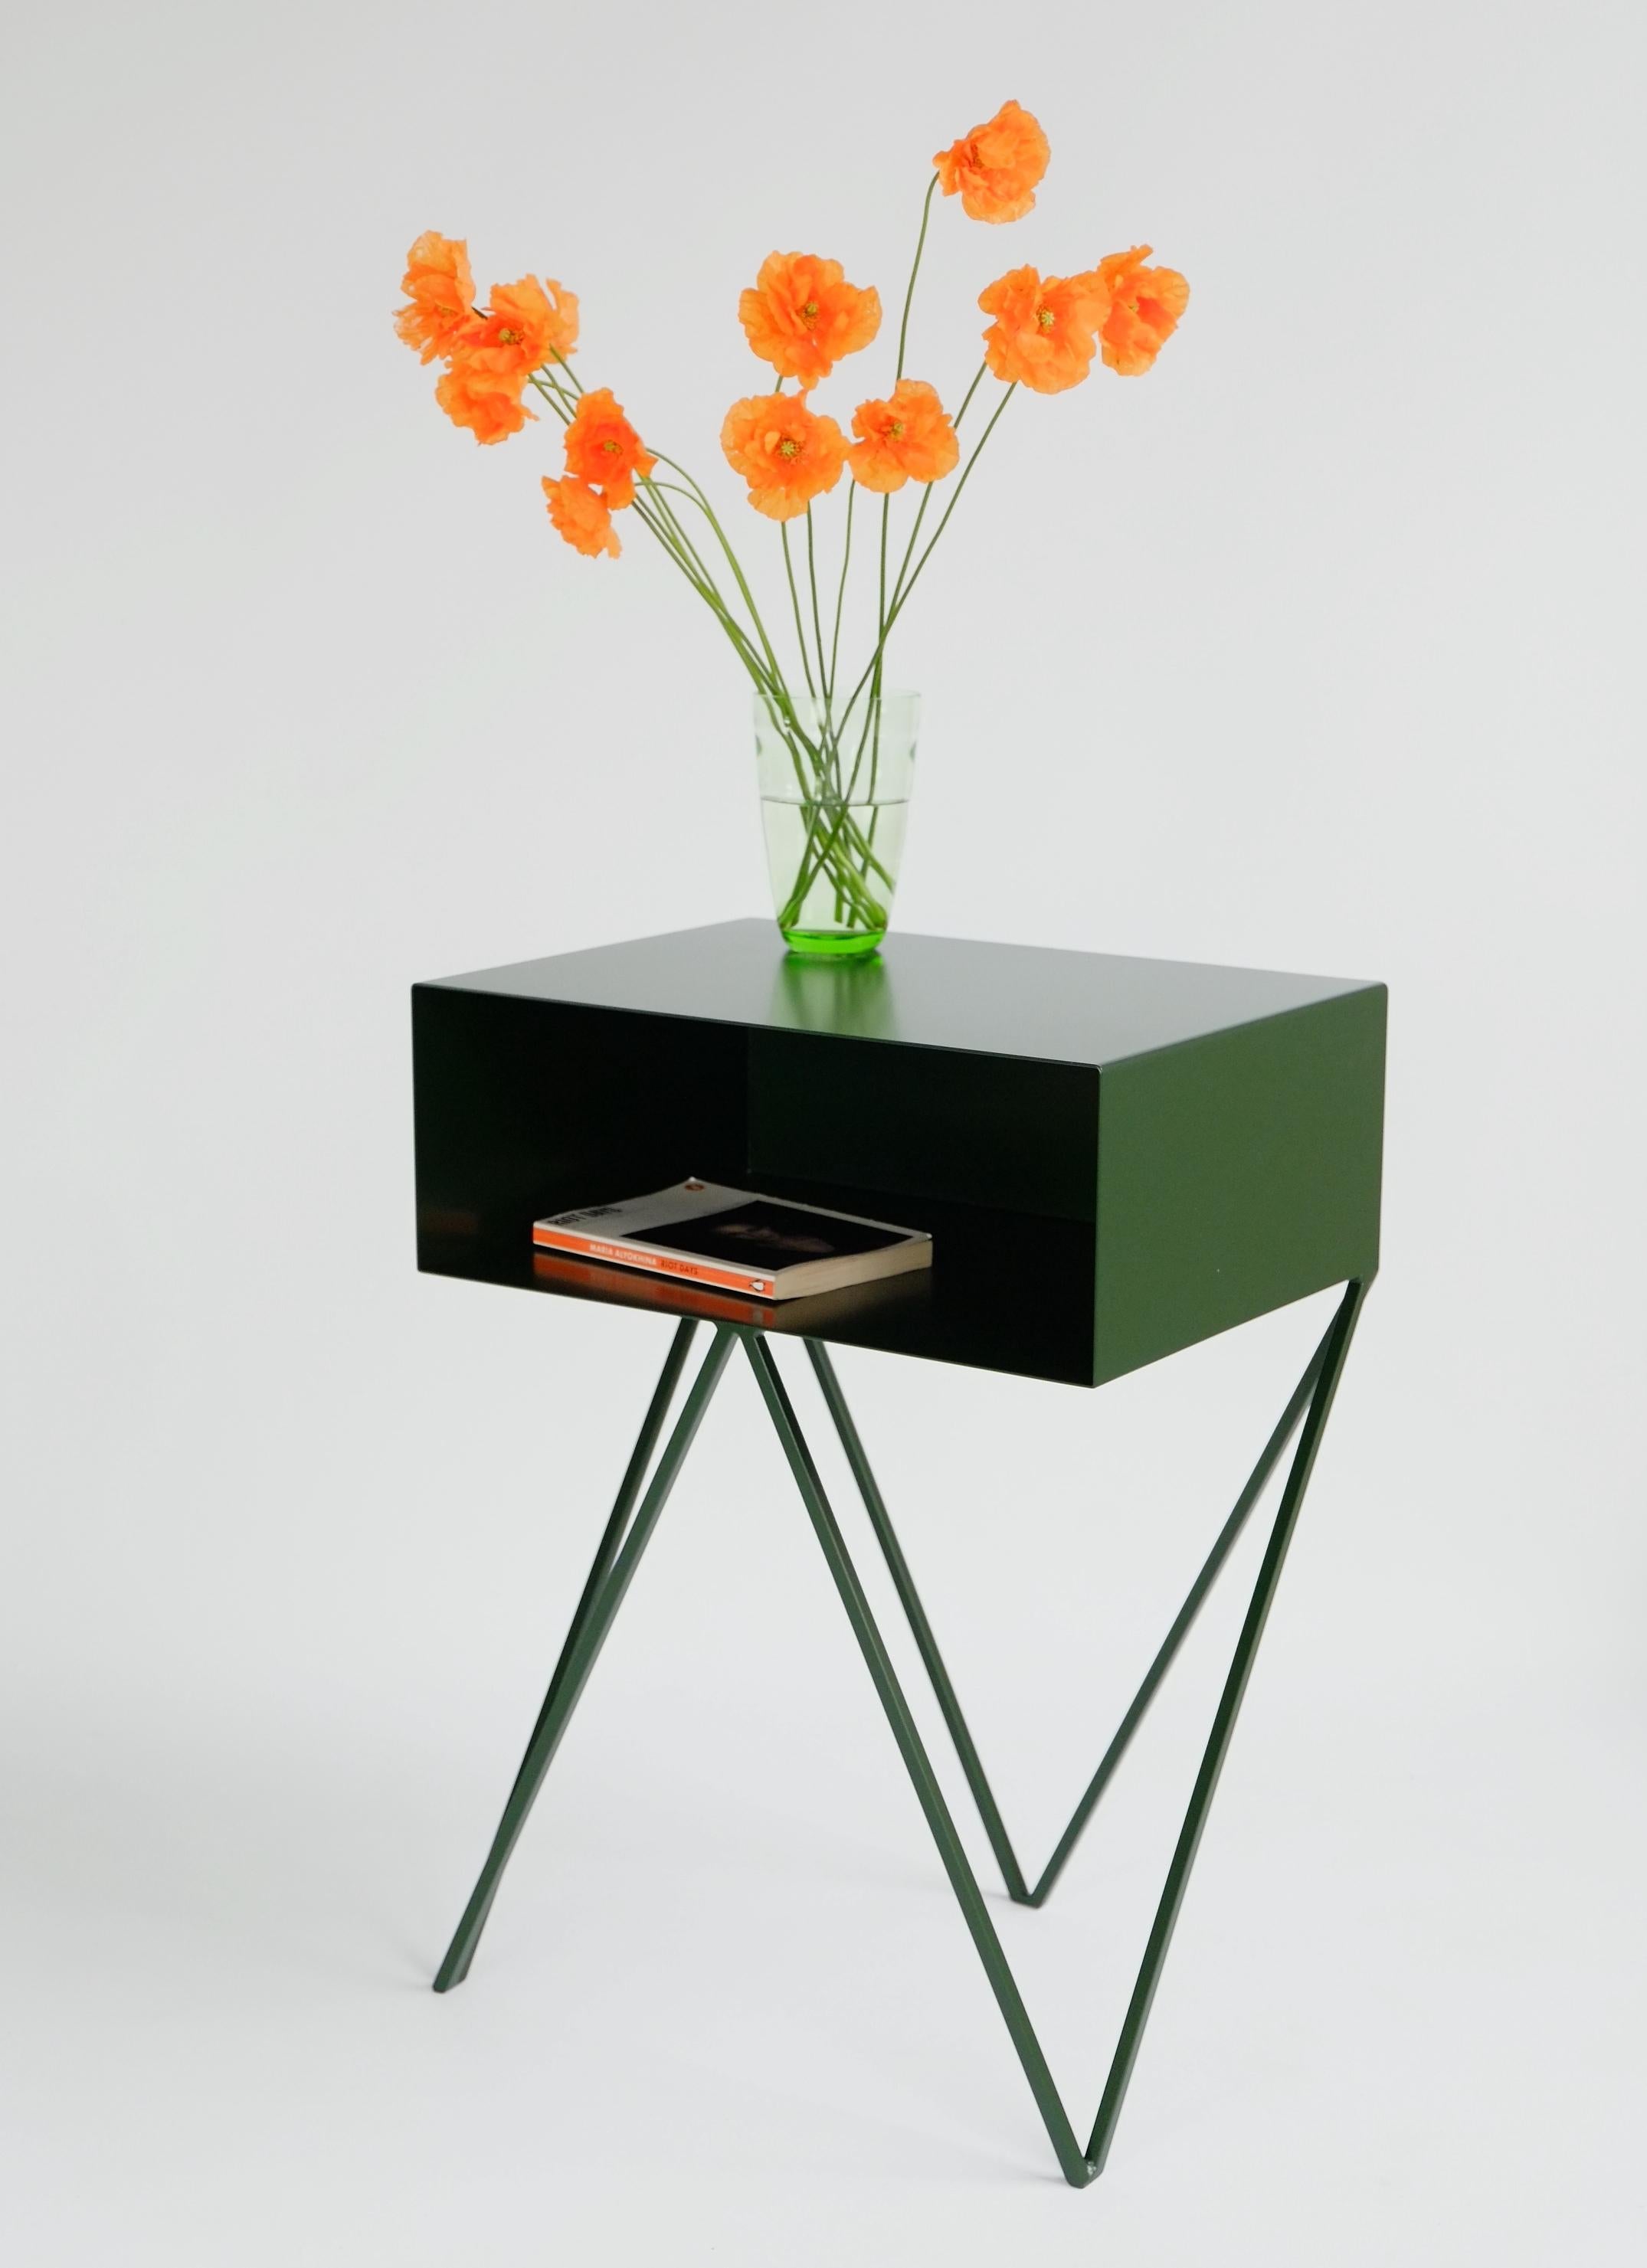 Our all-time best-seller the Robot side table features an open shelf on zig zag legs. A fun and functional design made of solid steel, powder-coated in dark green. The clean lines look great against period details as well as in modern spaces.